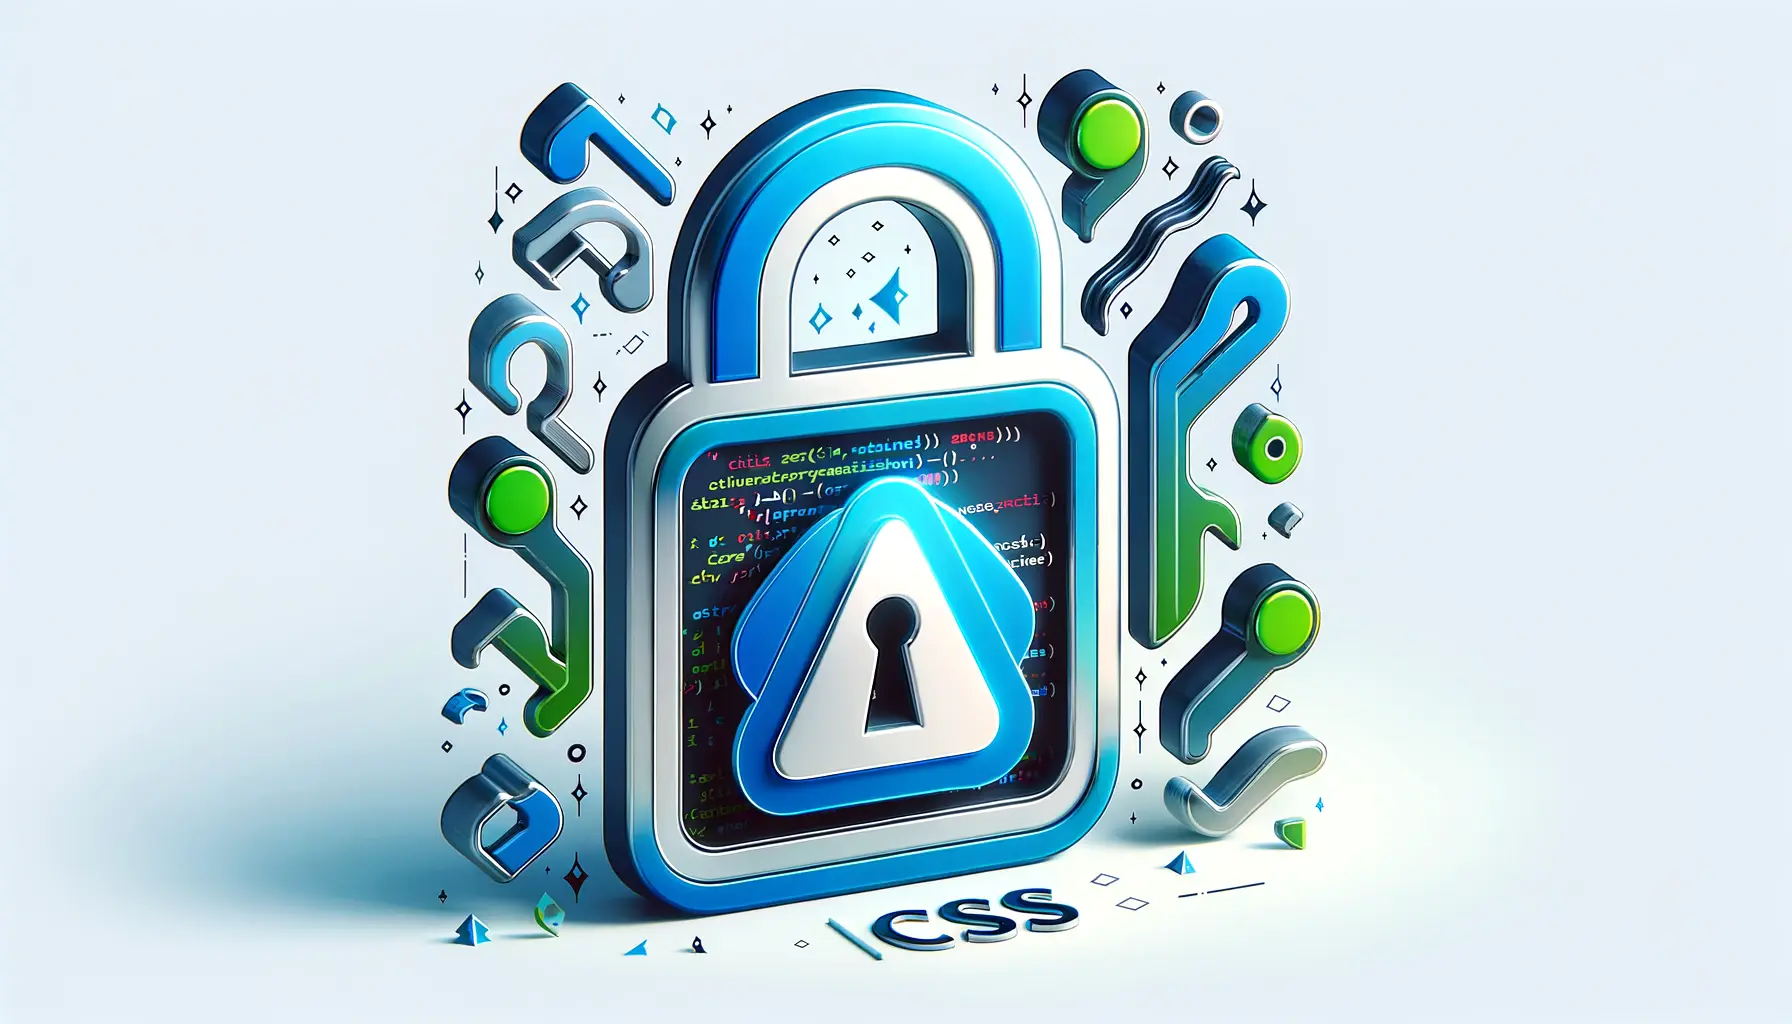 Enhancing Web Security with CSS Best Practices